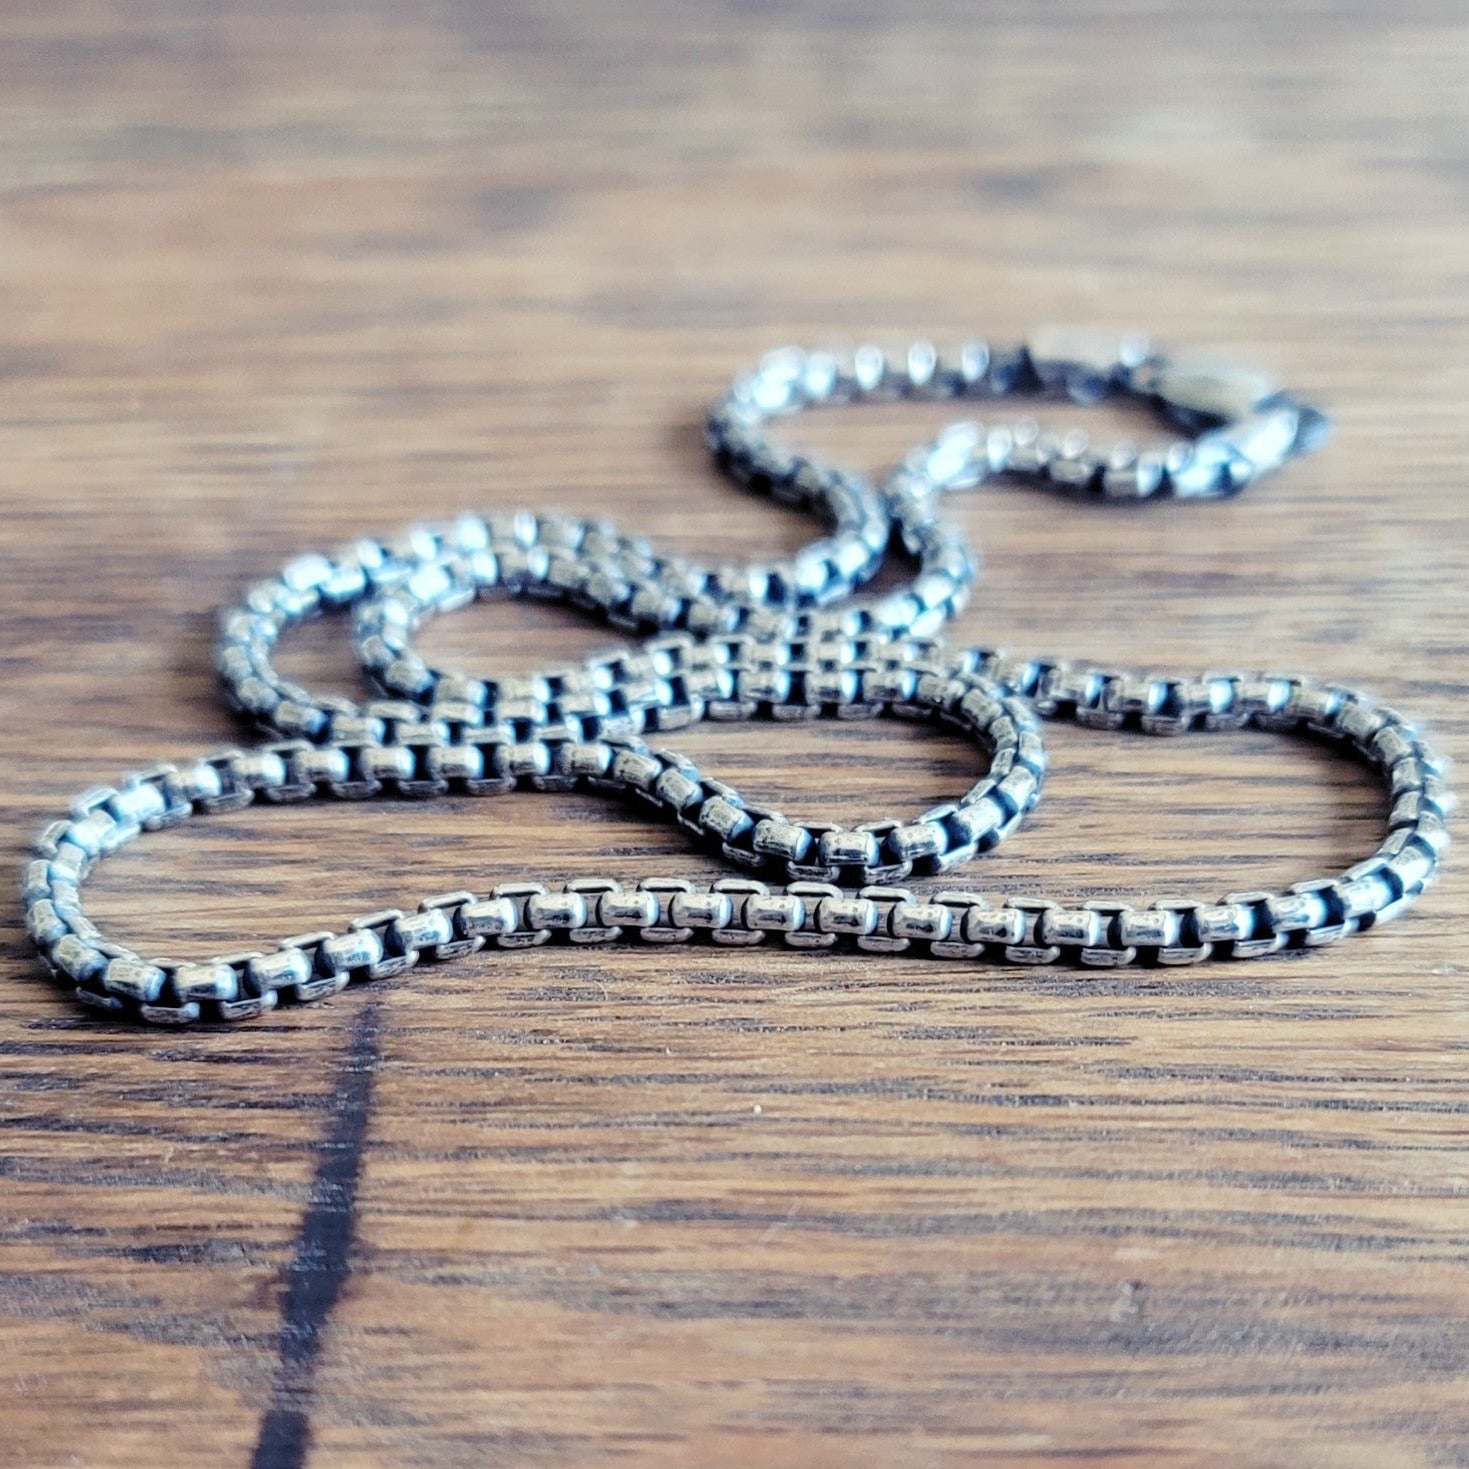 Oxidized Sterling Silver Box Chain, 3.1mm